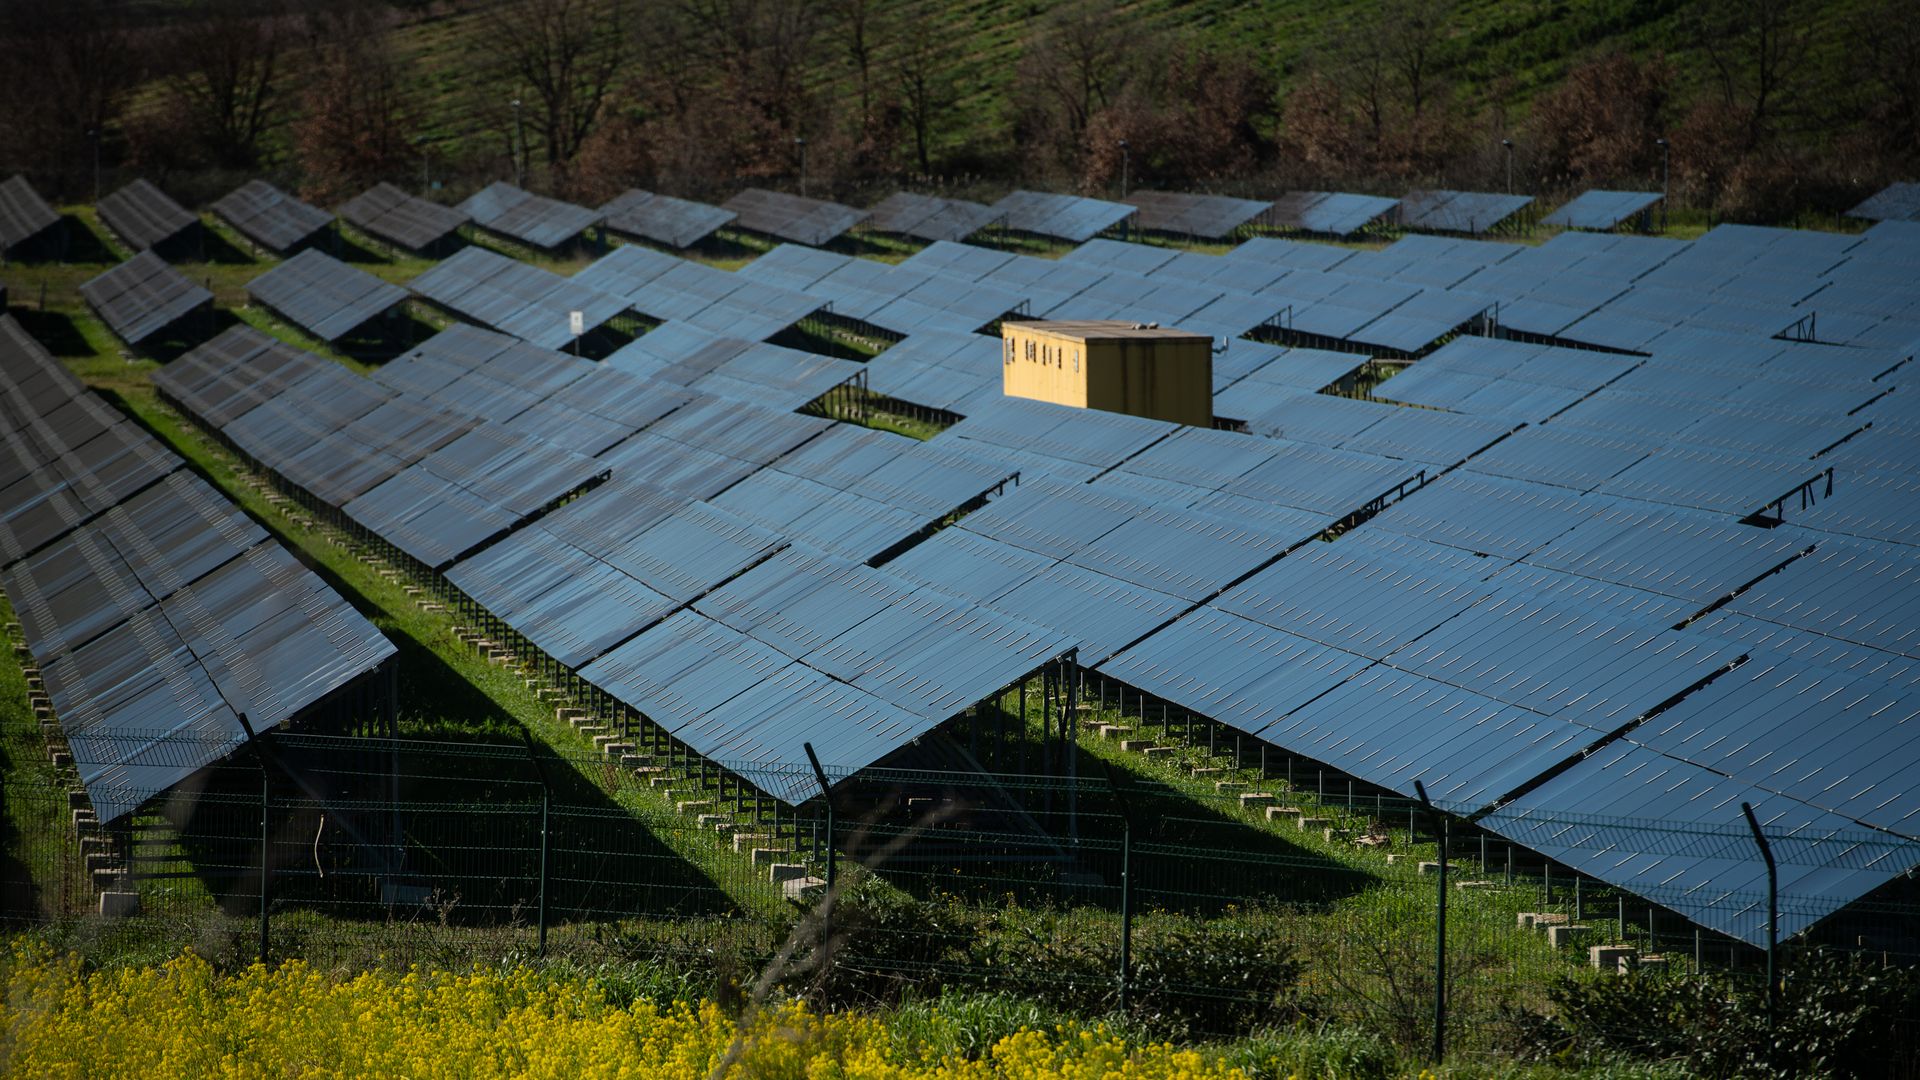 Enel Green Power photovoltaic plant in Cosenza, Italy. Photo: Ivan Romano/Getty Images